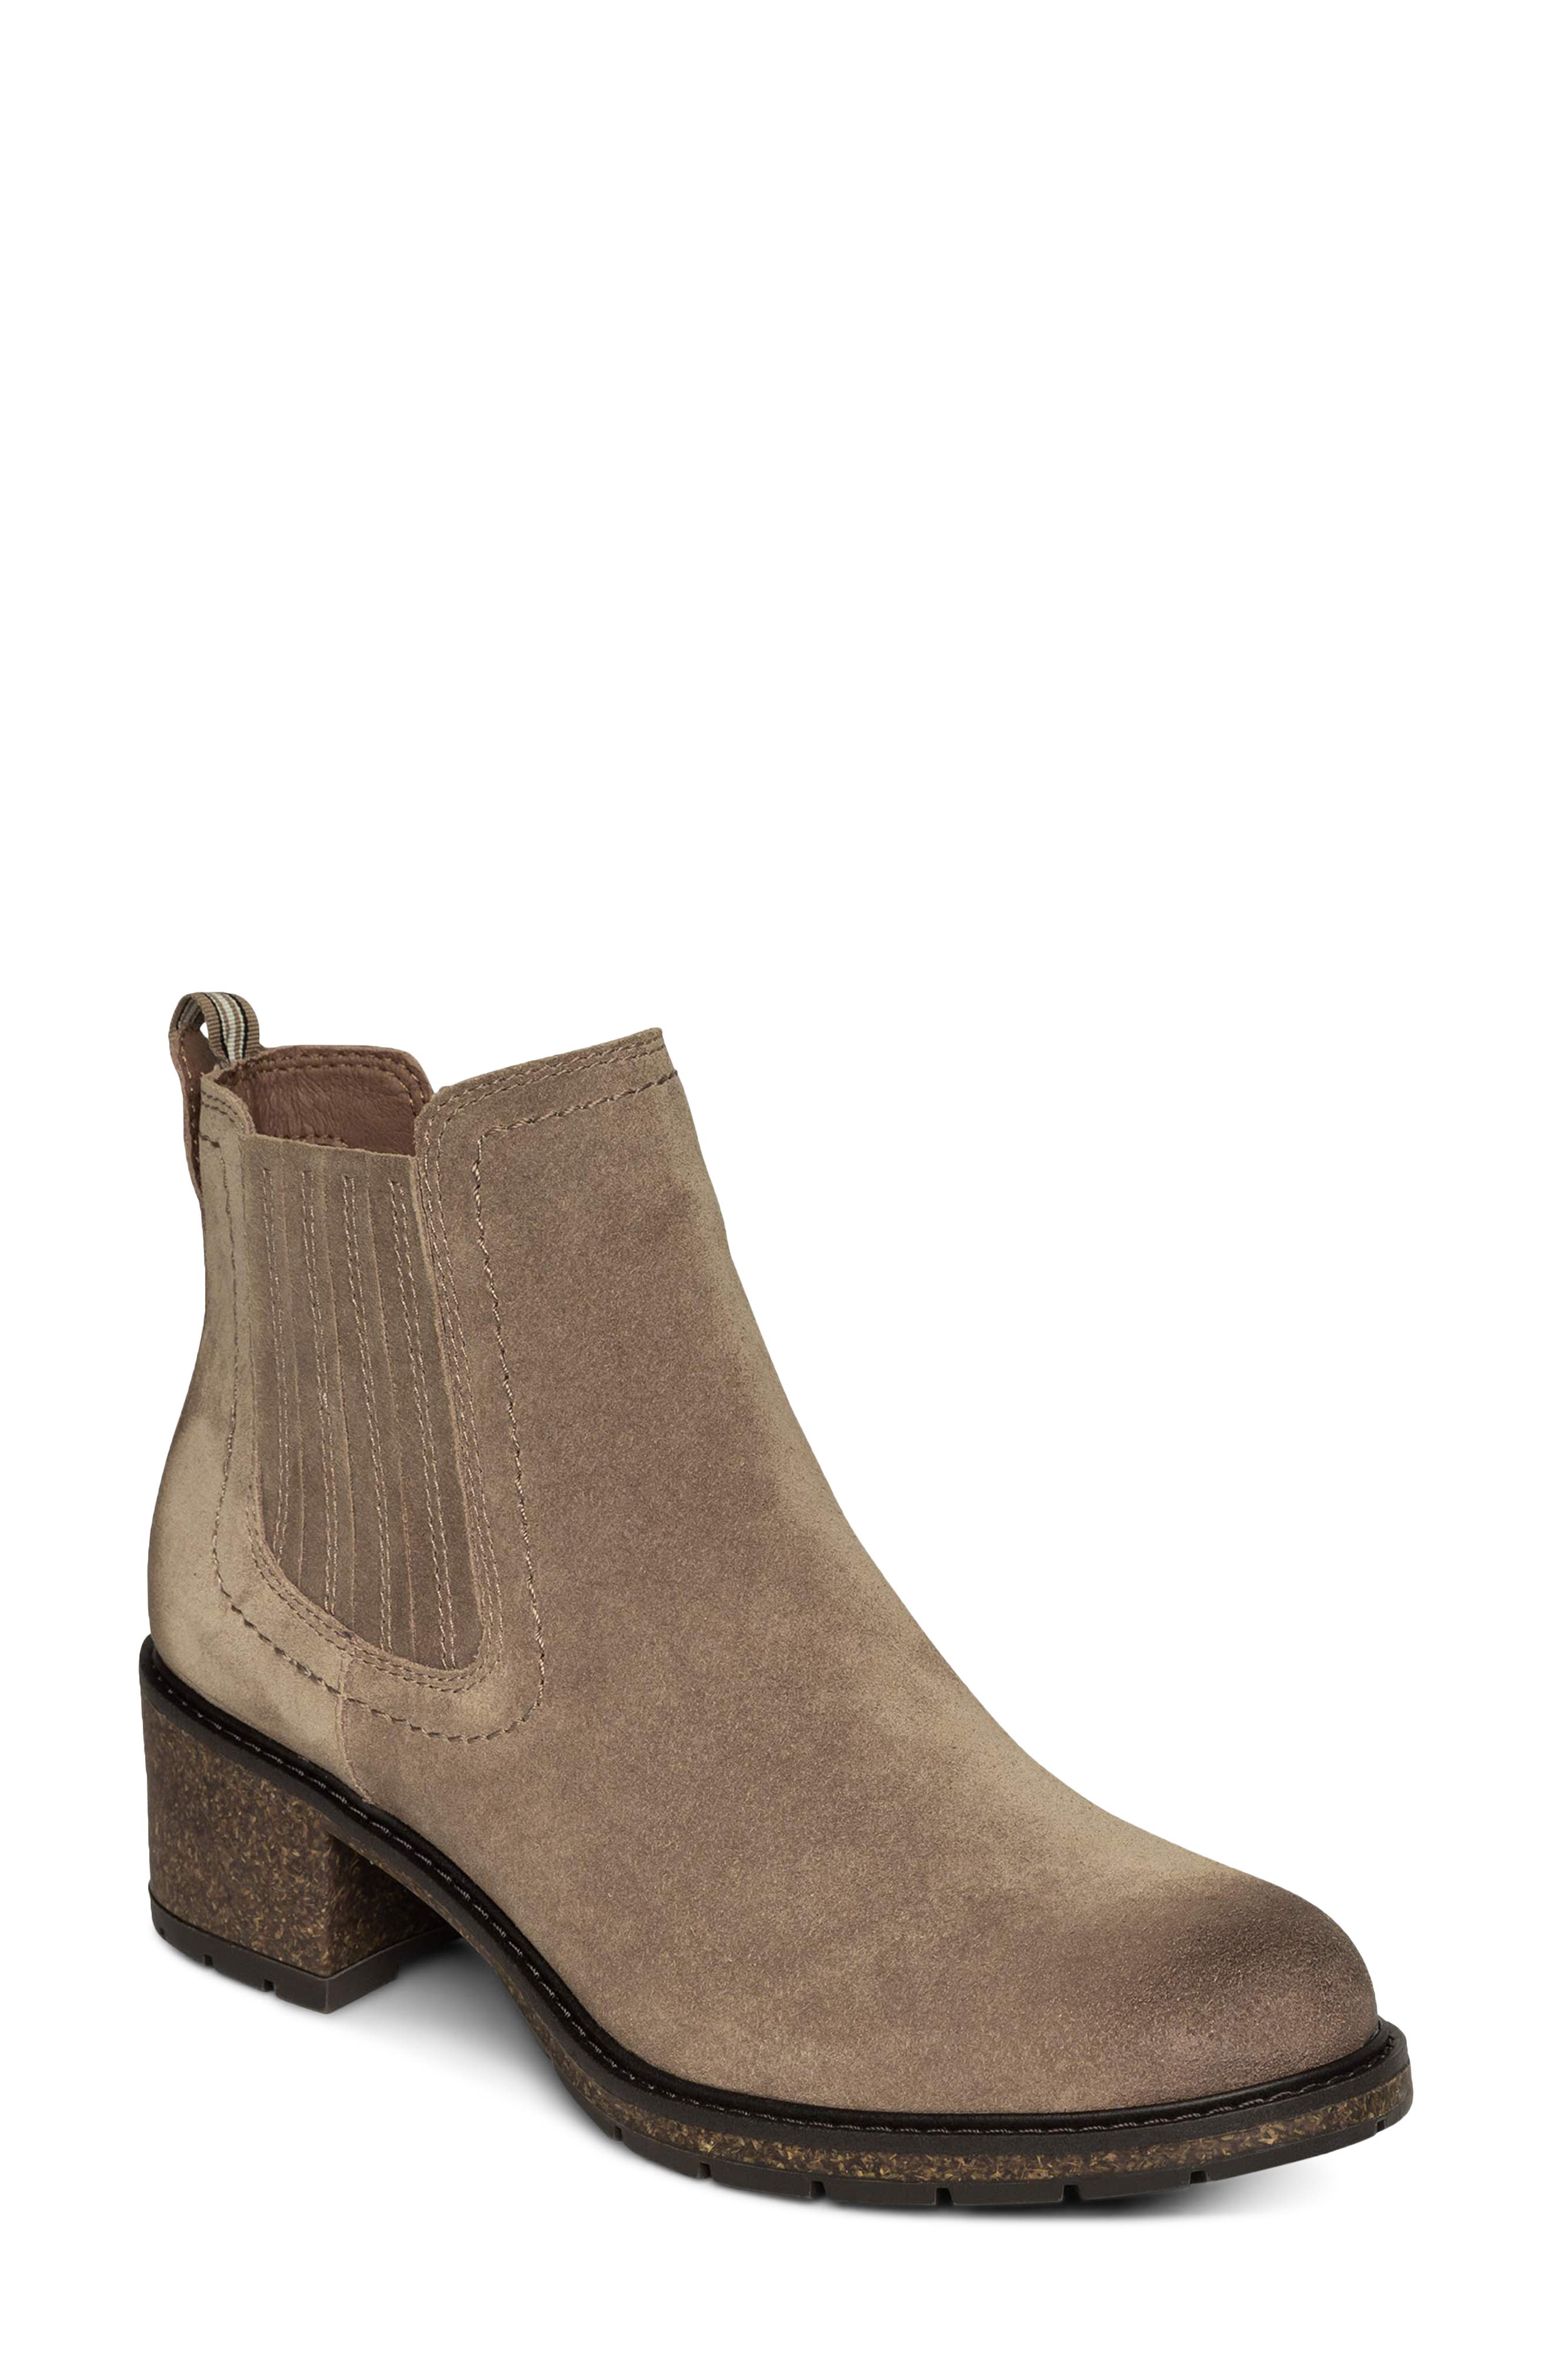 Aetrex Booties \u0026 Ankle Boots | Nordstrom